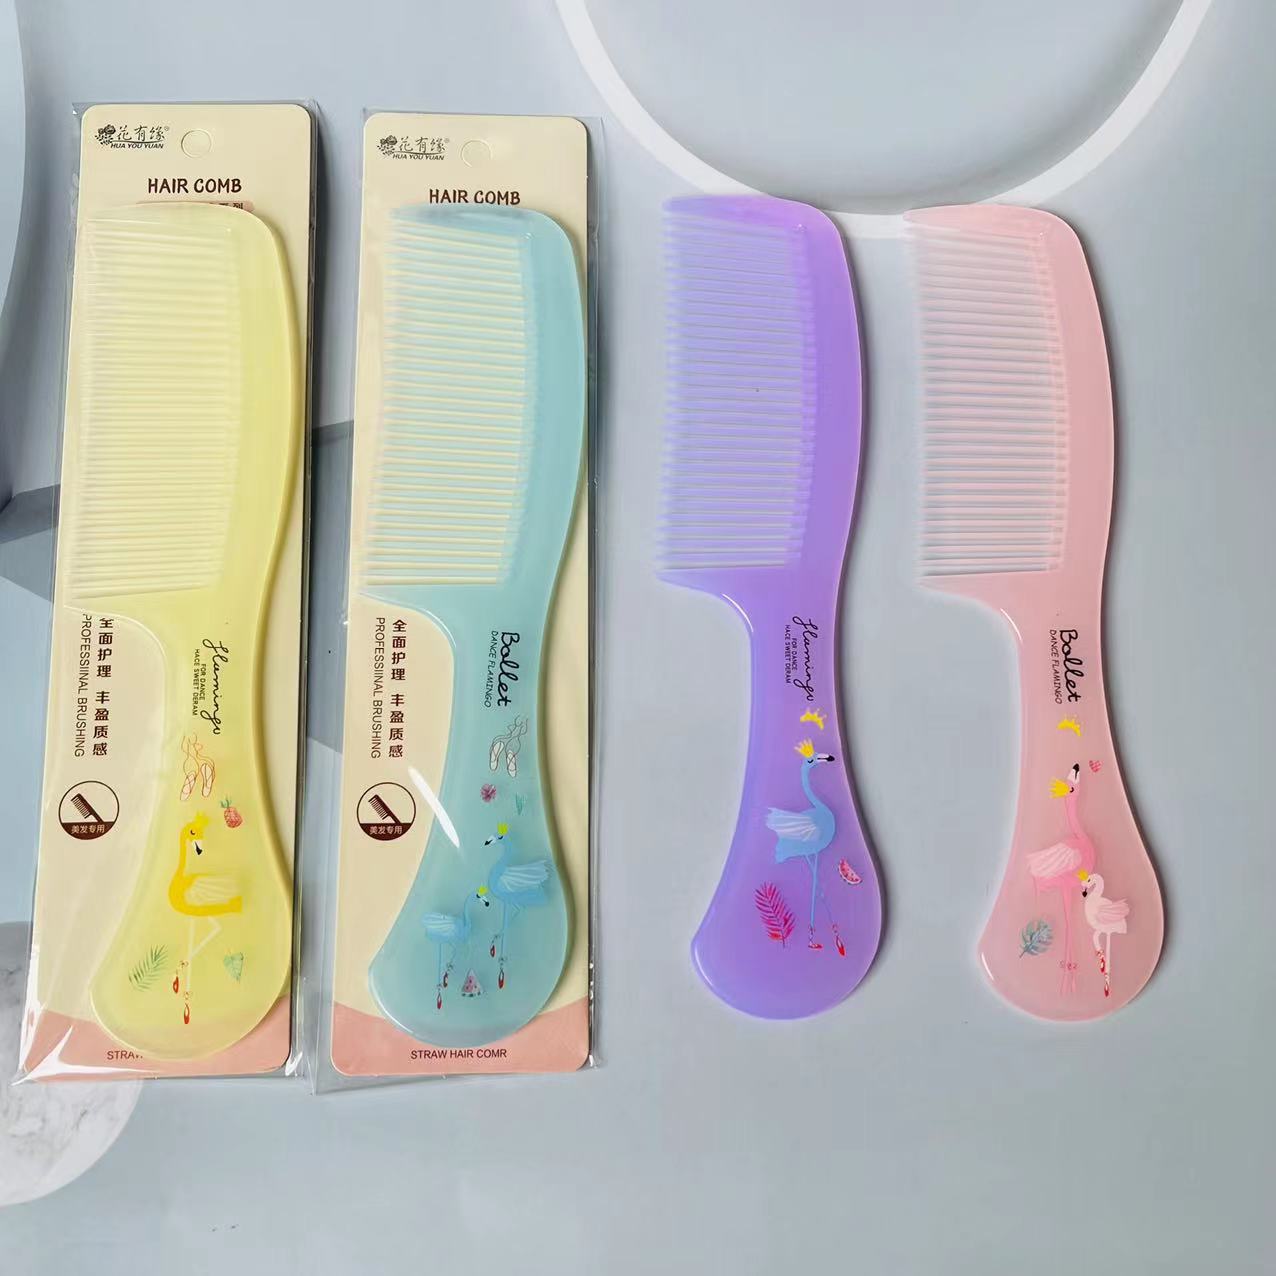 Luminous Comb a-1 Hairdressing Comb Household Female Anti-Static Dense Gear Comb Styling Comb 1 Yuan Supply